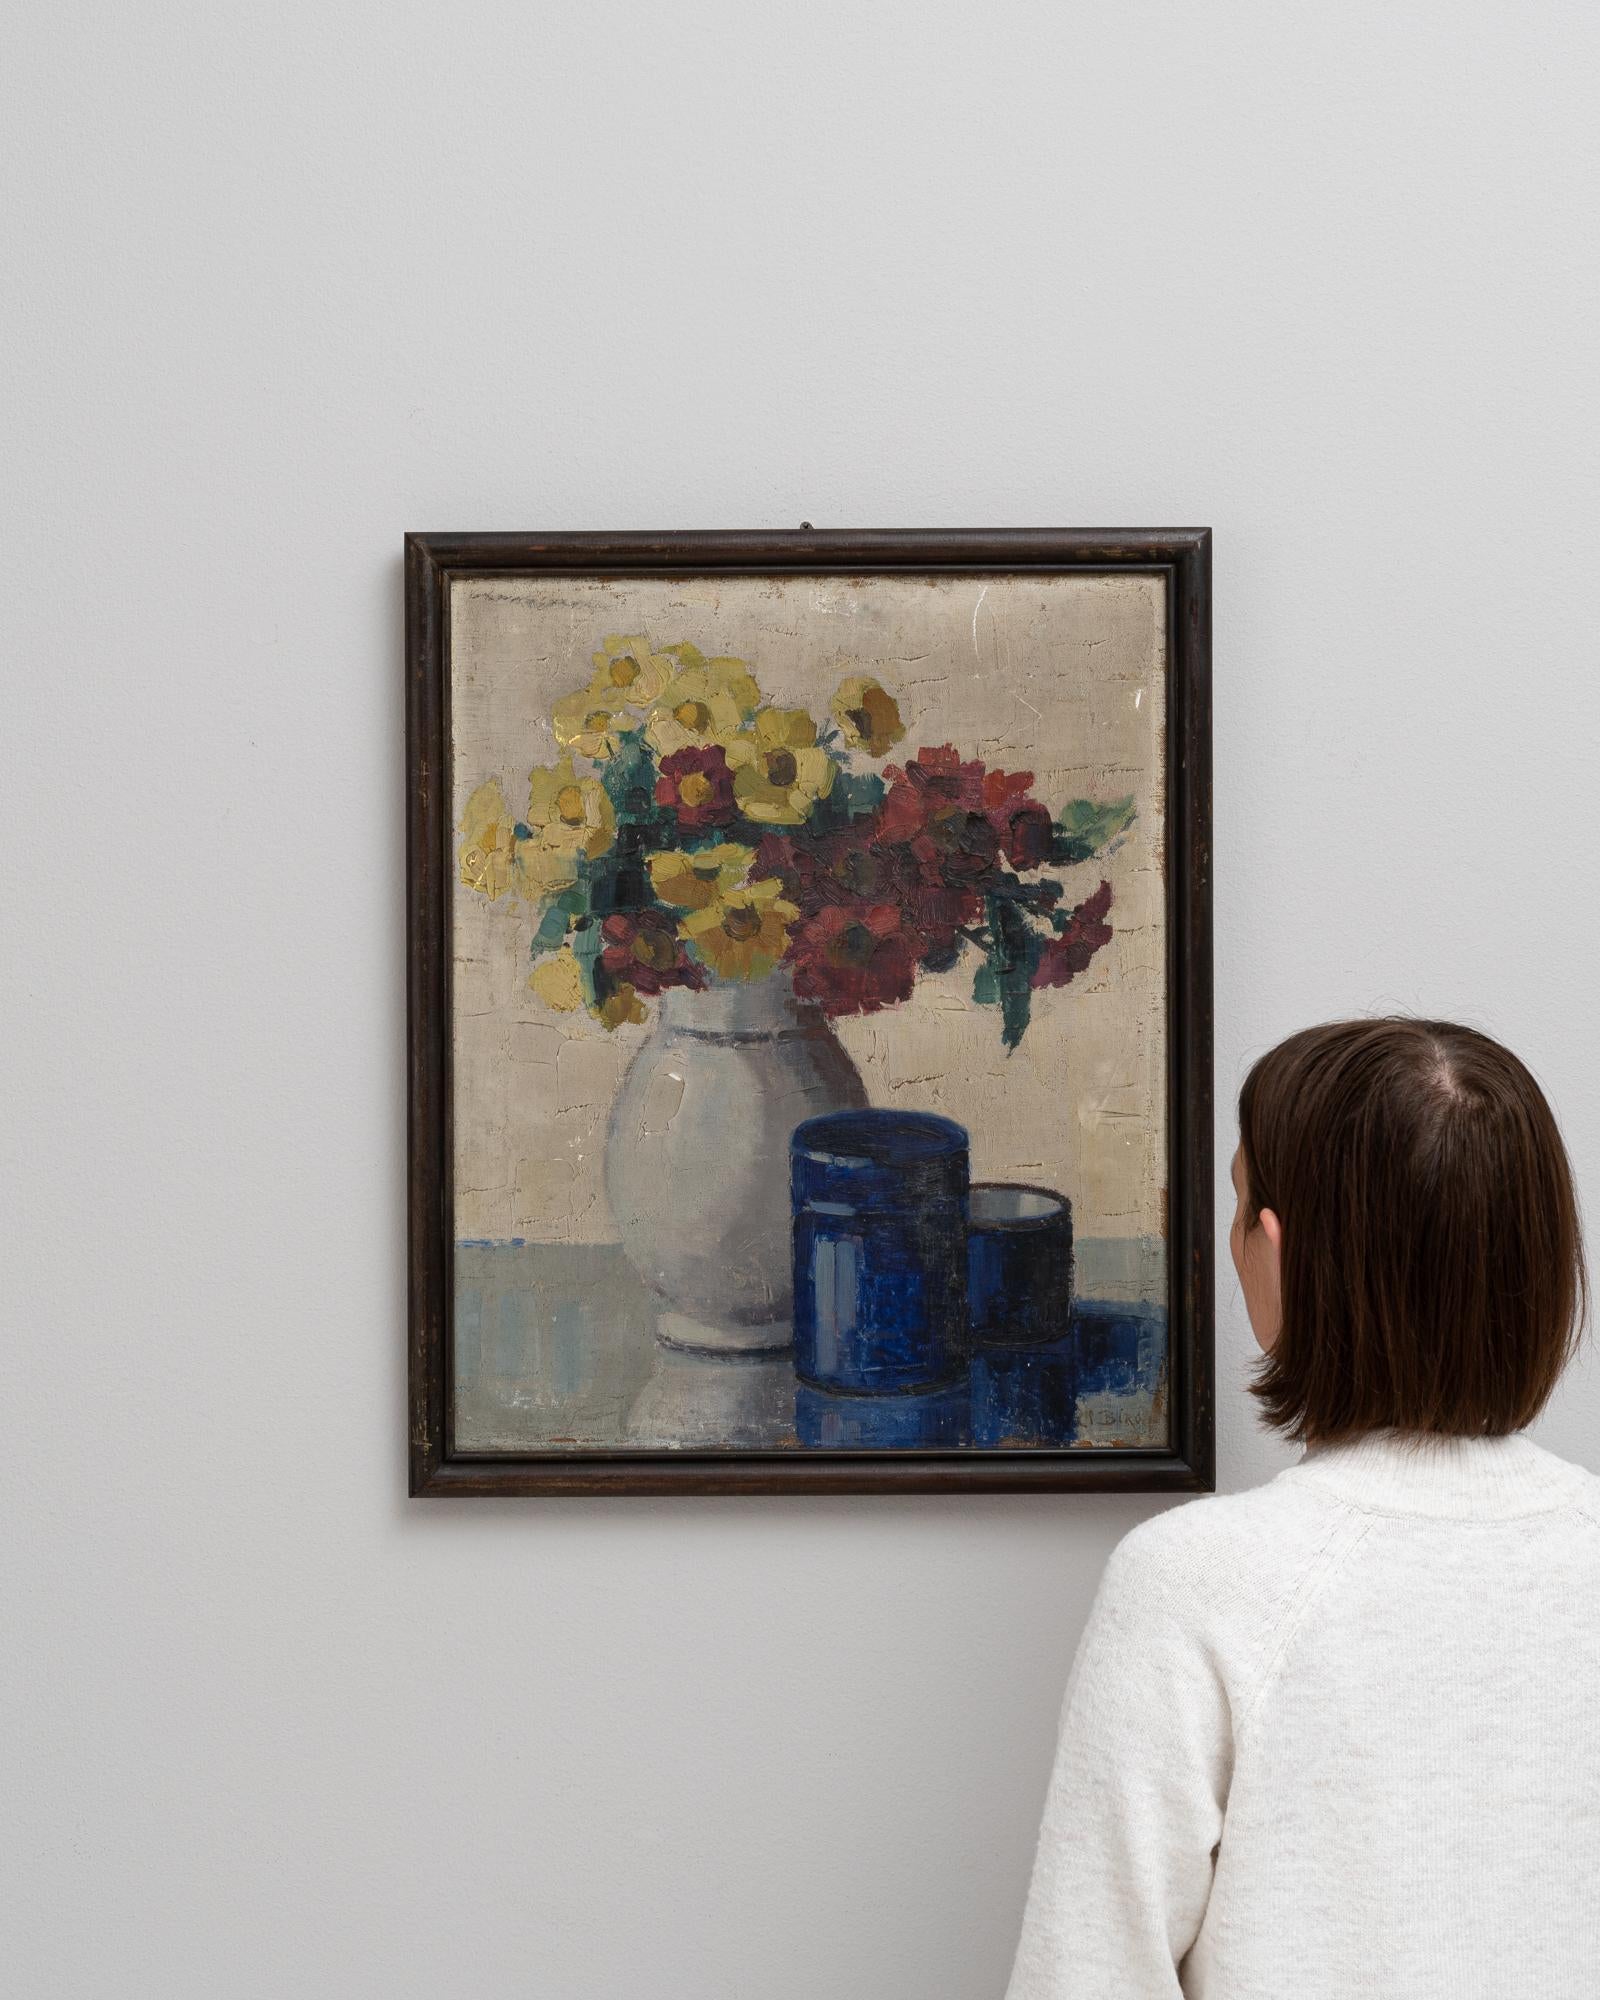 This delightful 20th Century French painting brings a burst of color and charm to any space. It features a vibrant bouquet of flowers, rendered in thick, confident brushstrokes, set against a muted background that allows the warm yellows and deep